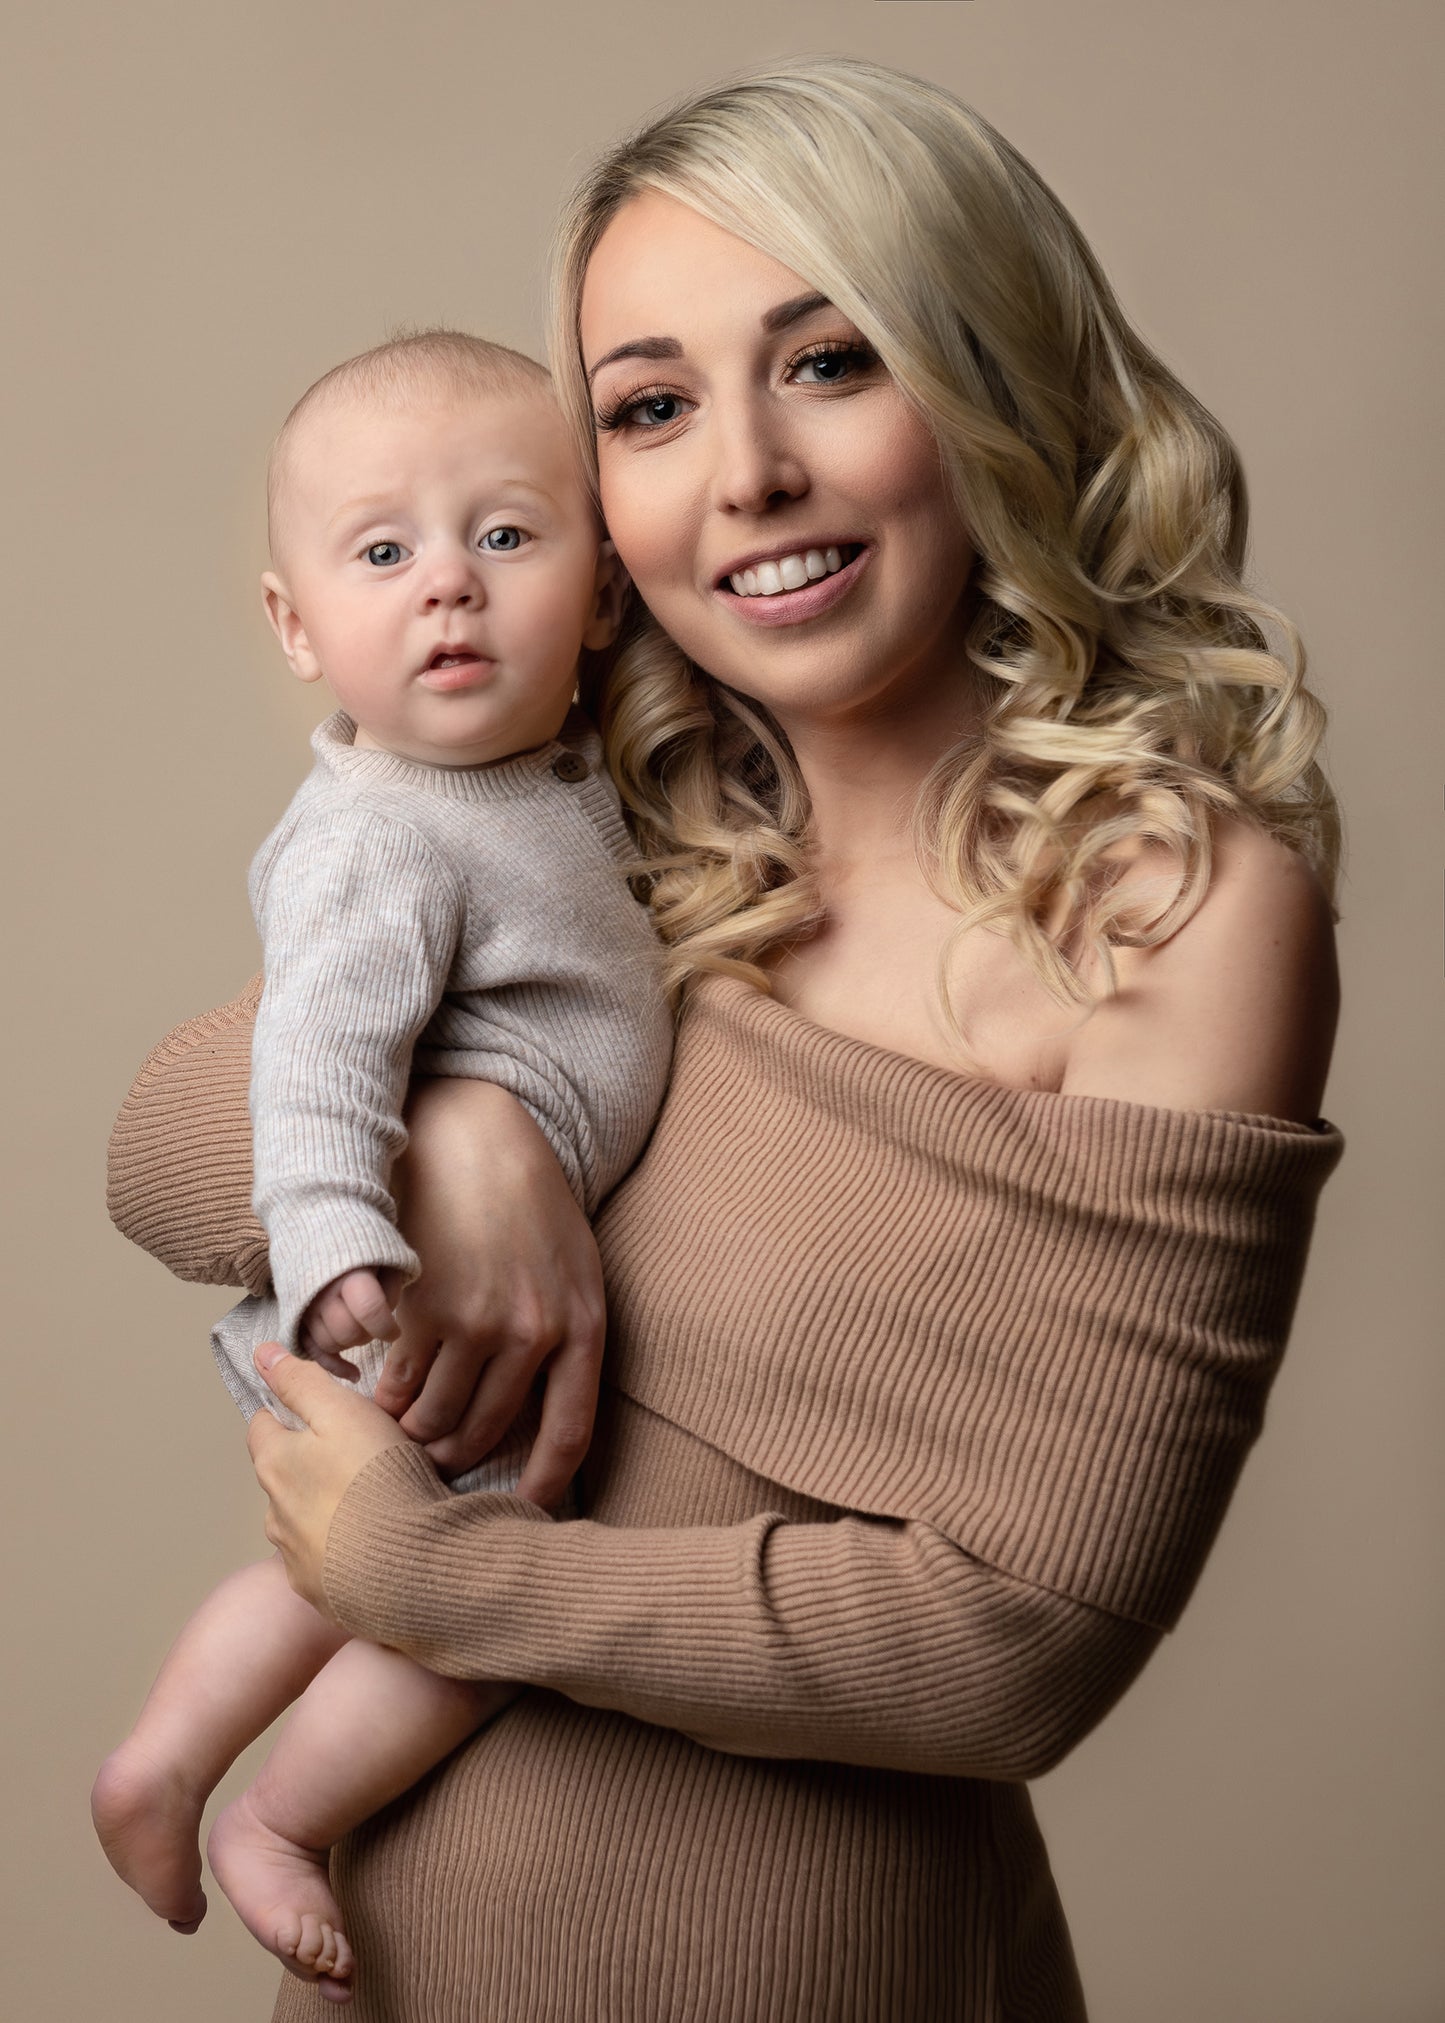 Mothers Day Mini Photo Shoot by Claire Hill Photography in perton Wolverhampton West Midlands near Brimingham Shewsbury Telford & Shropshire